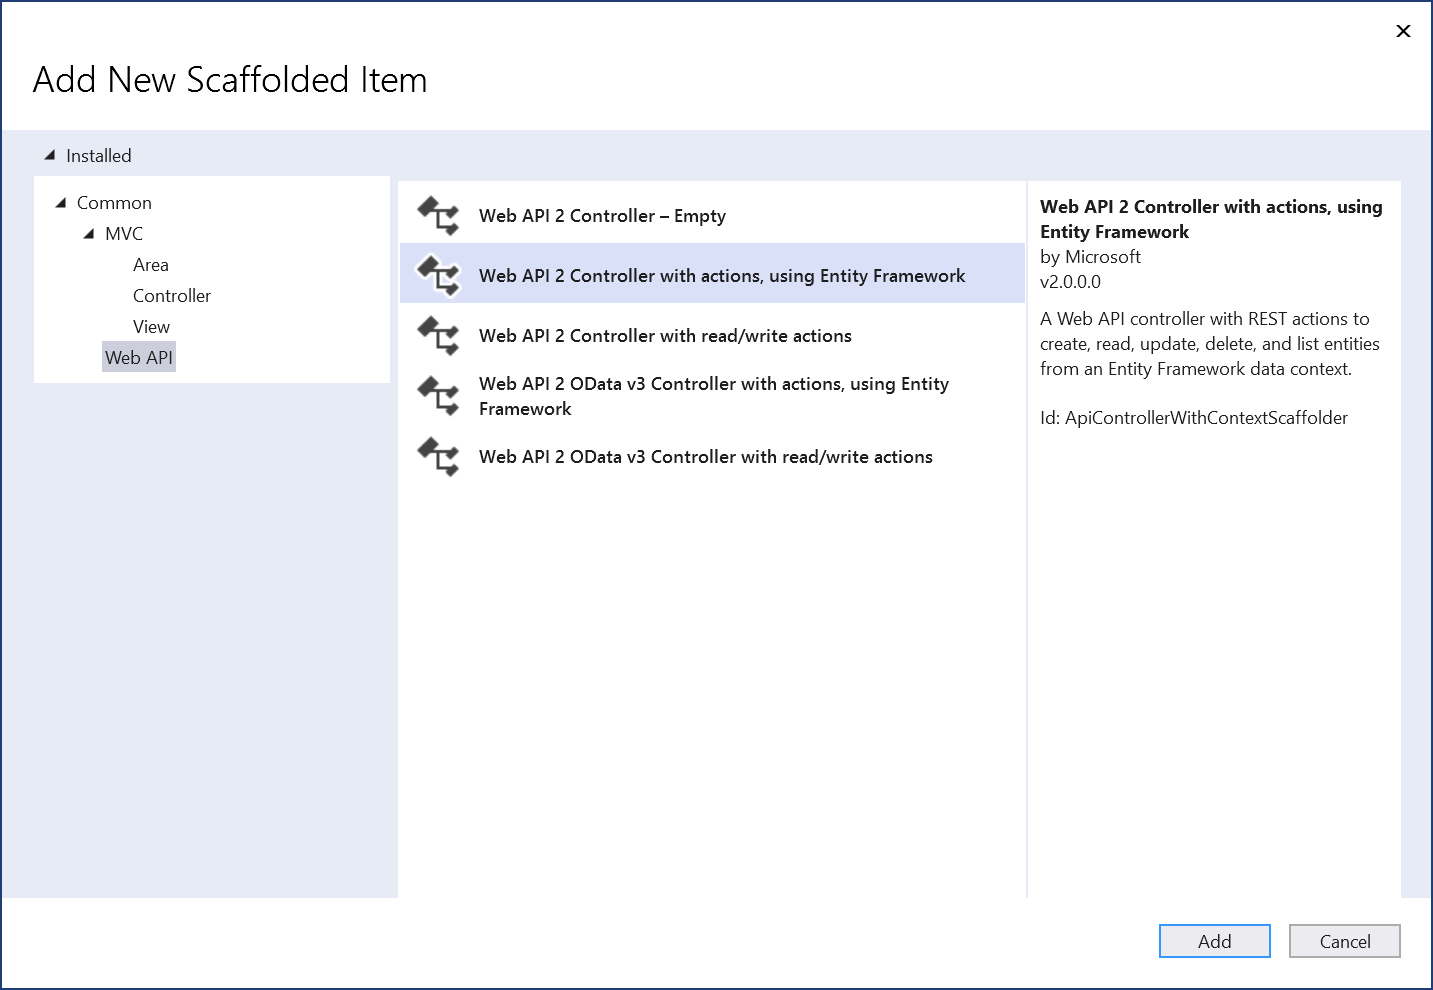 Add New Scaffolded Item Dialog Box - Web API 2 Controller With Actions, Using Entity Framework